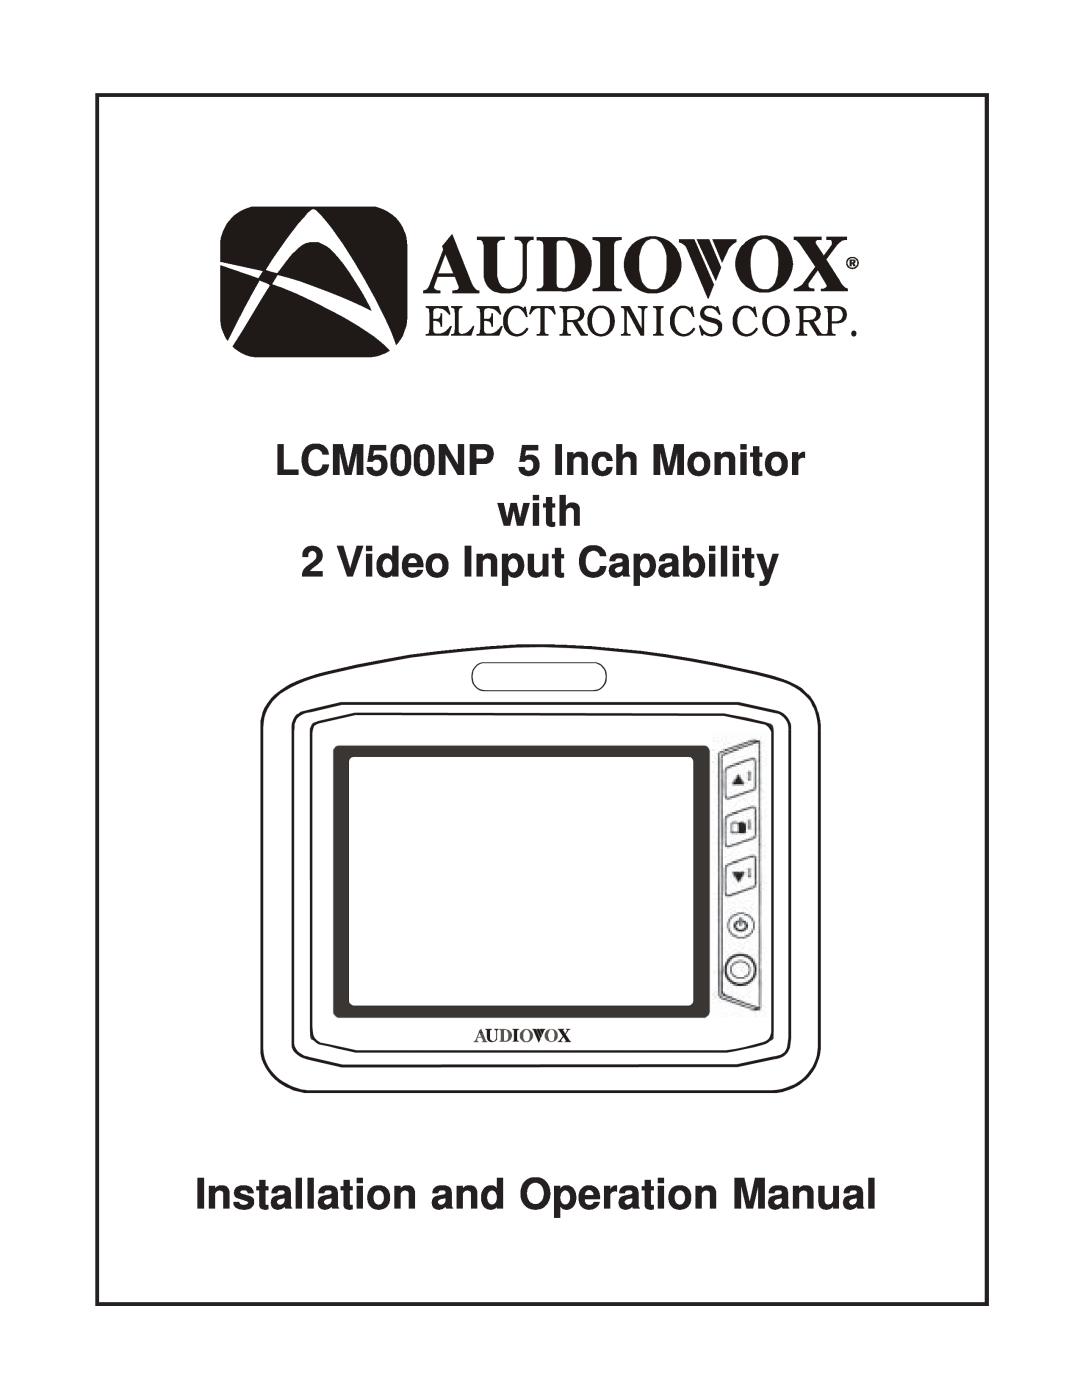 Audiovox operation manual Electronics Corp, LCM500NP 5 Inch Monitor, Installation and Operation Manual, with 